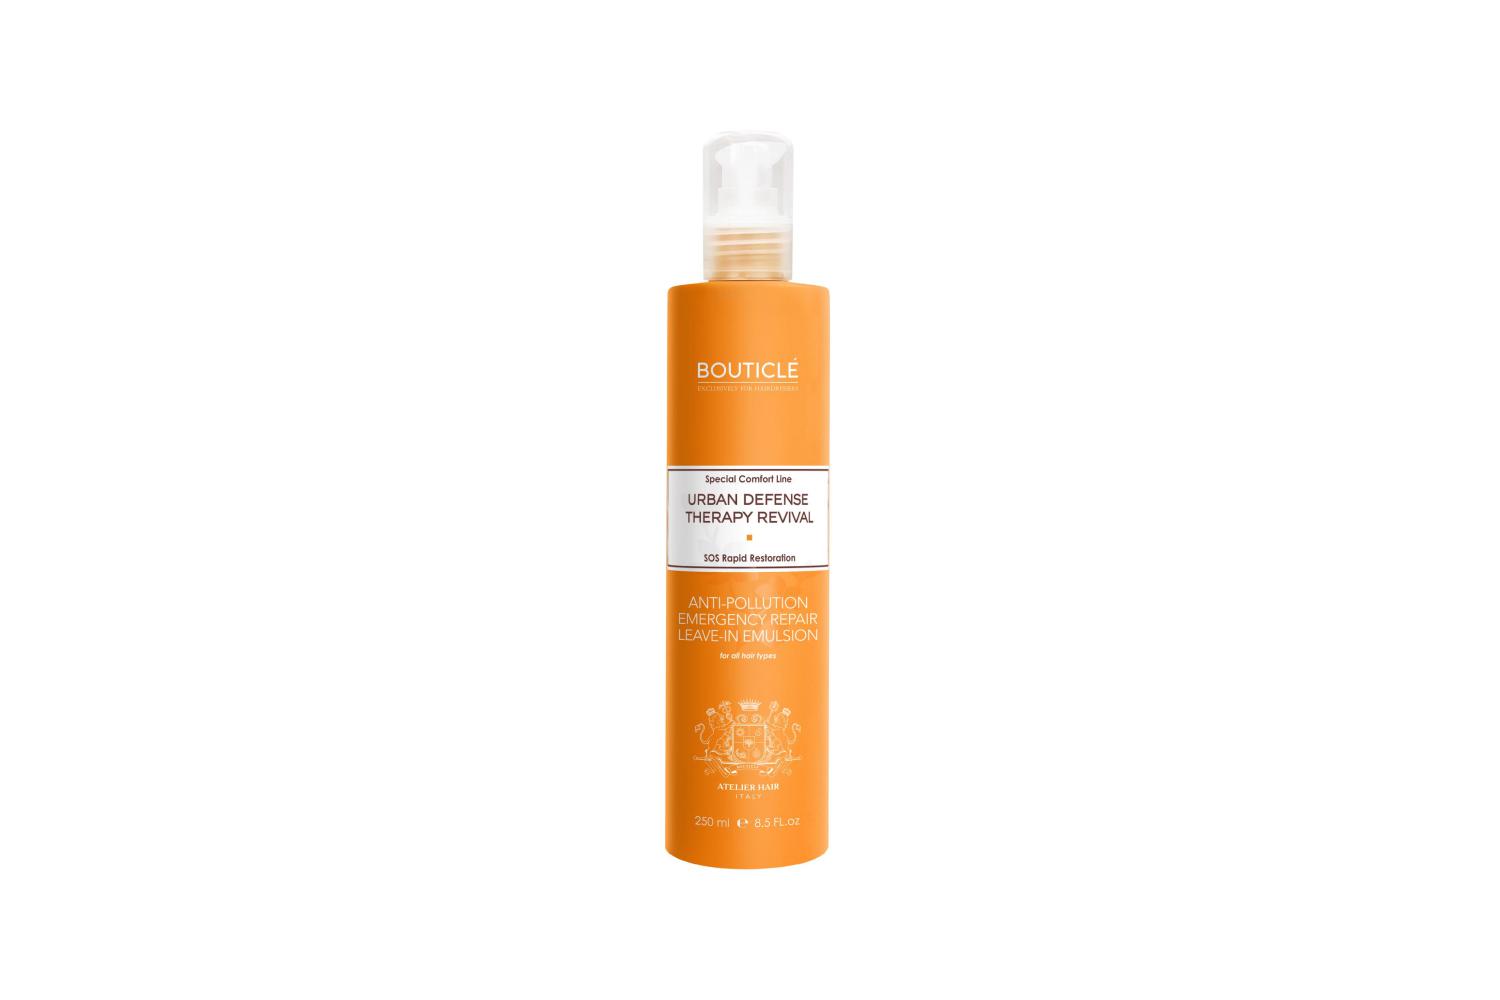 Intensive restorative emulsion Anti-Pollution Emergency Leave-In Imulsion, Bouticle, RUB 1,695.  (boutique.shop)